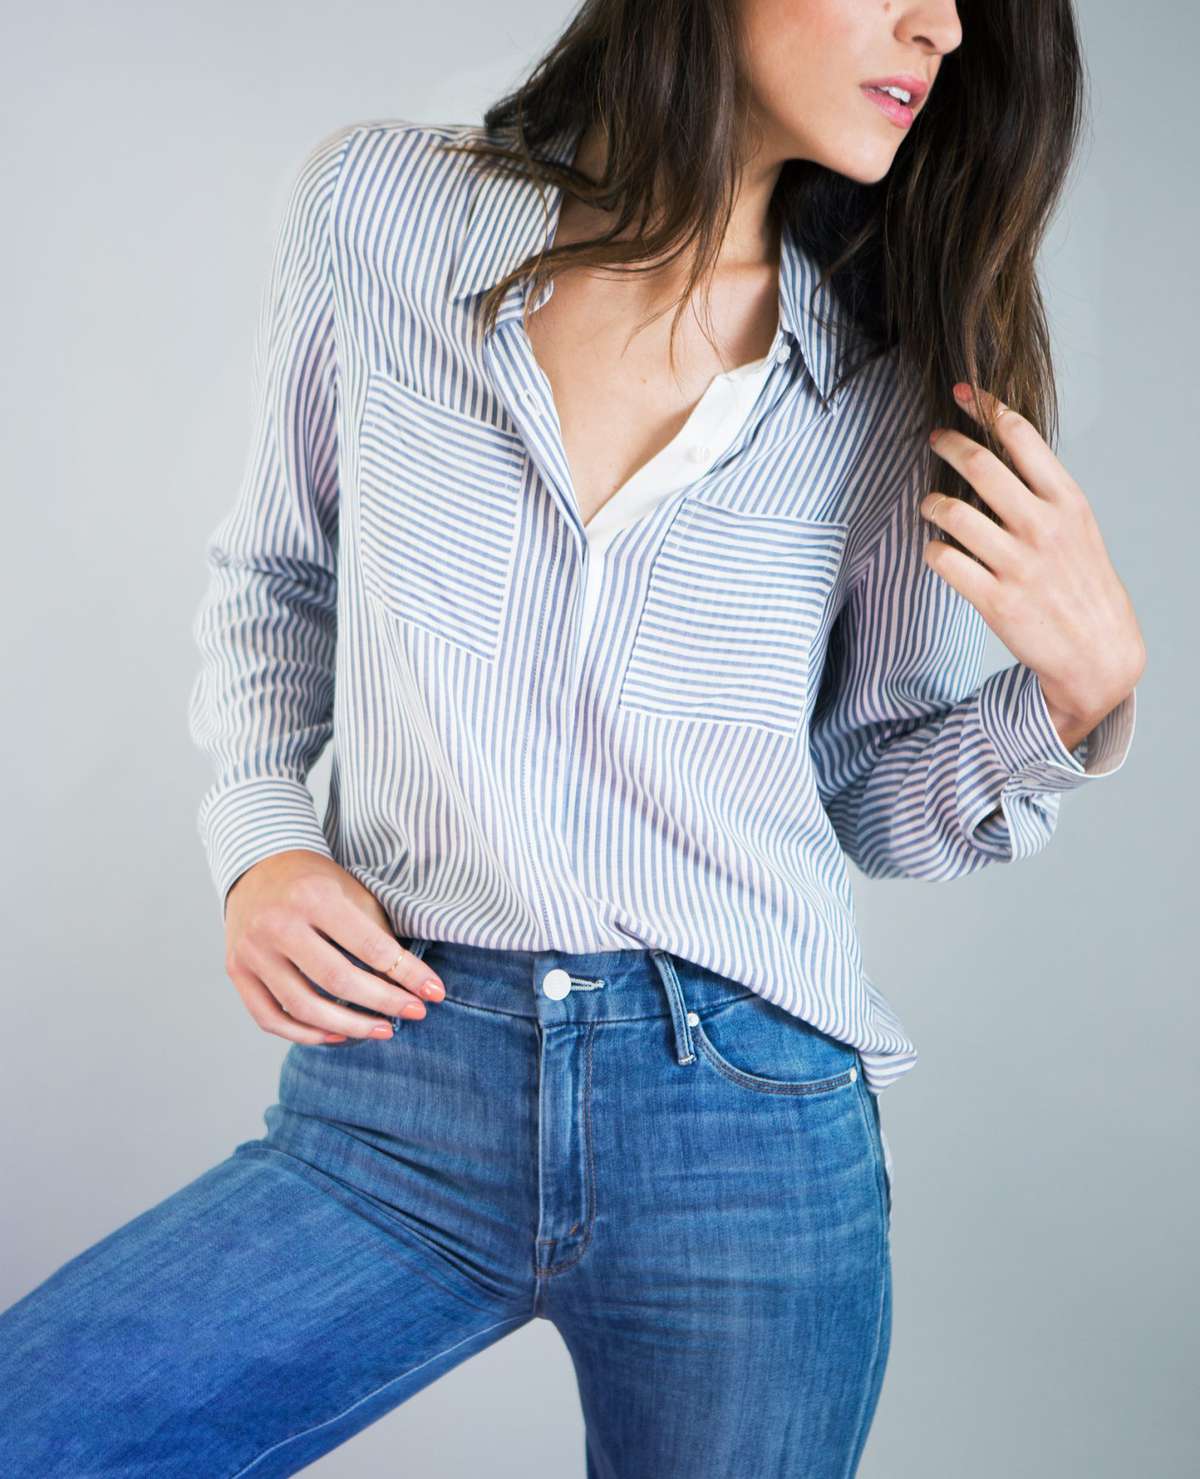 Naked girls in button up shirts How To Tuck Your Shirt In Gif Guide Instyle